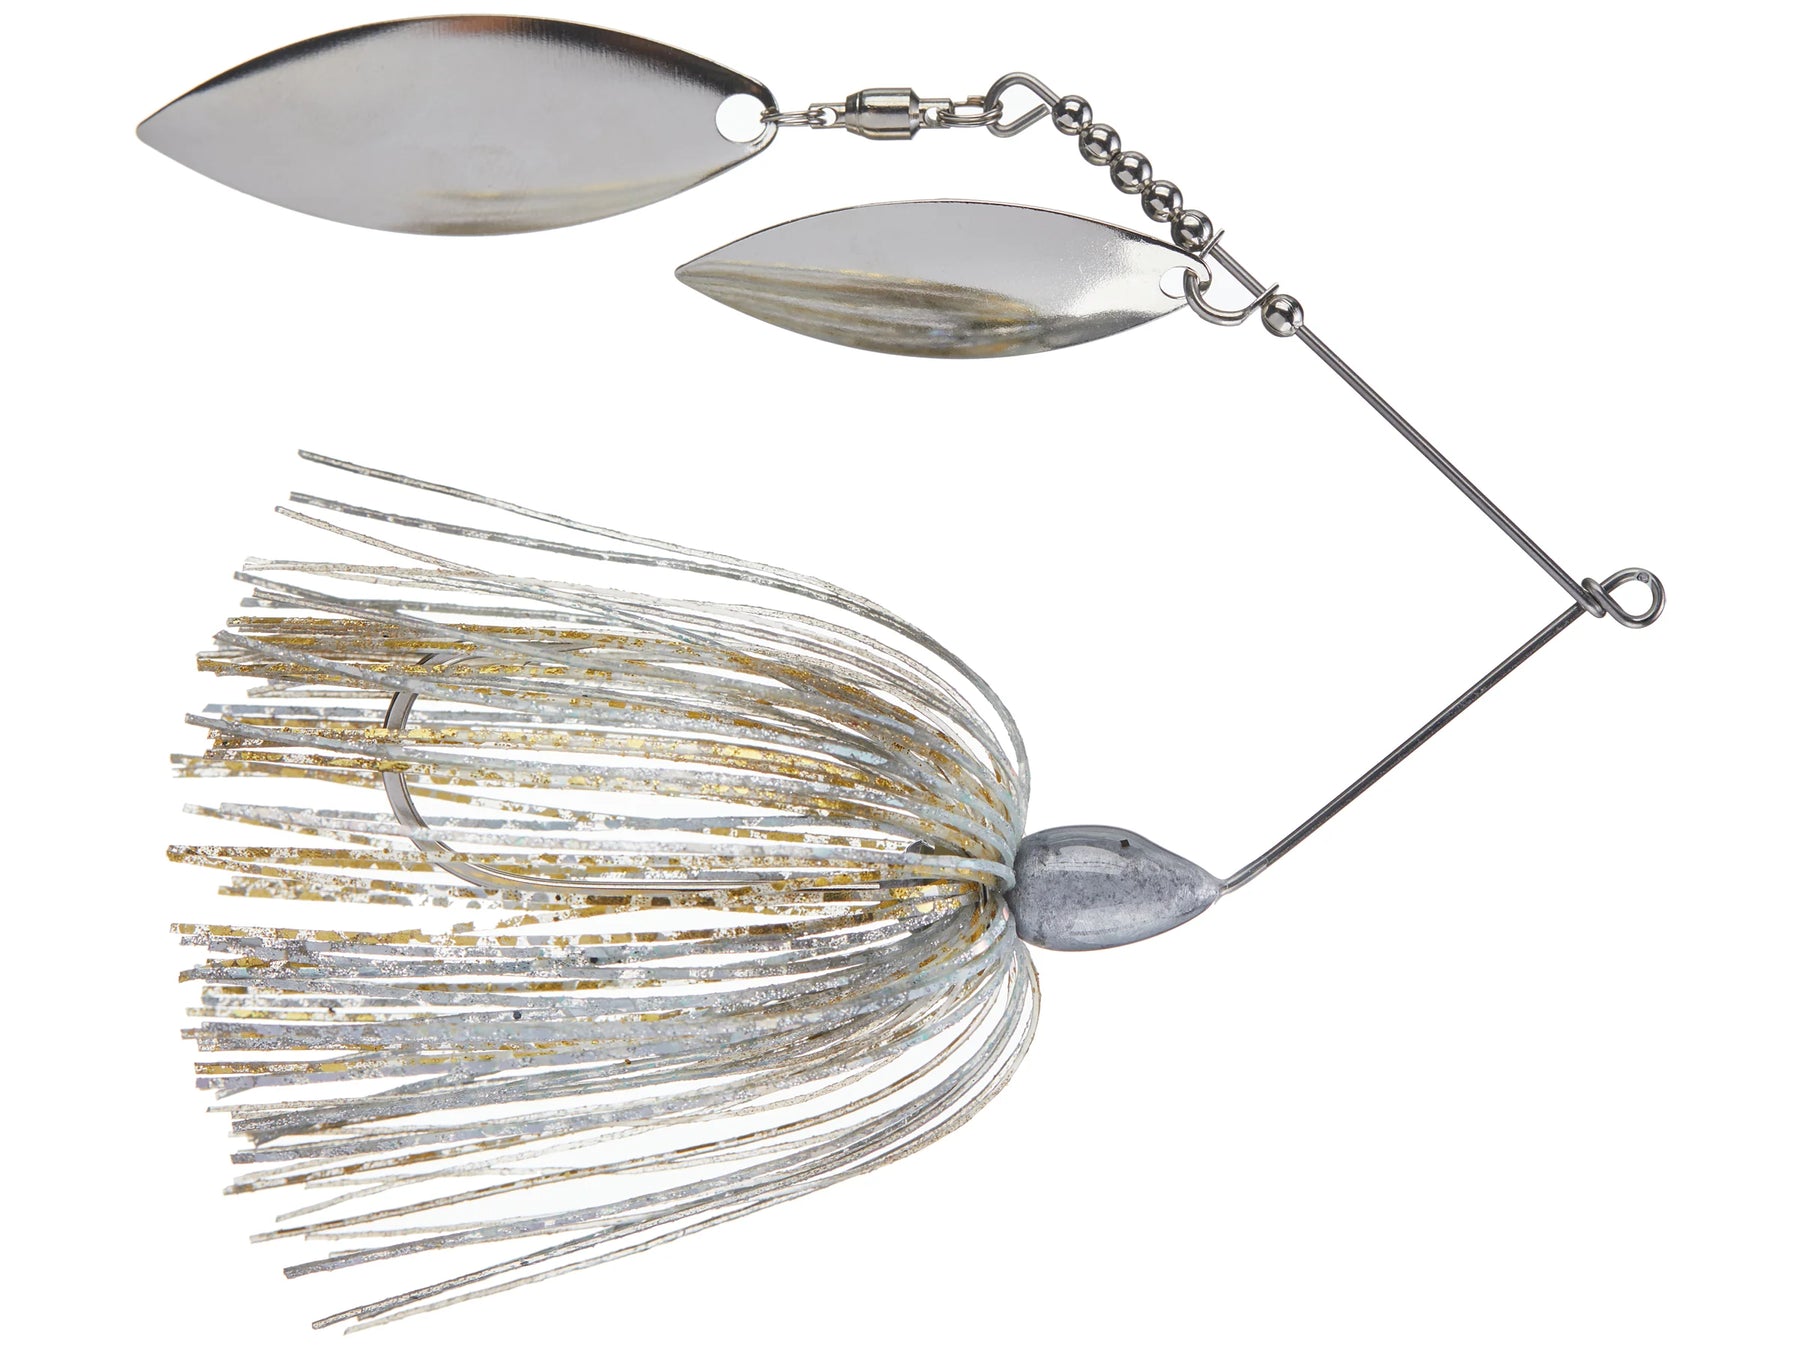 Greenfish Tackle Bad Little Blade Spinnerbait Chart Flash / 7/16 oz